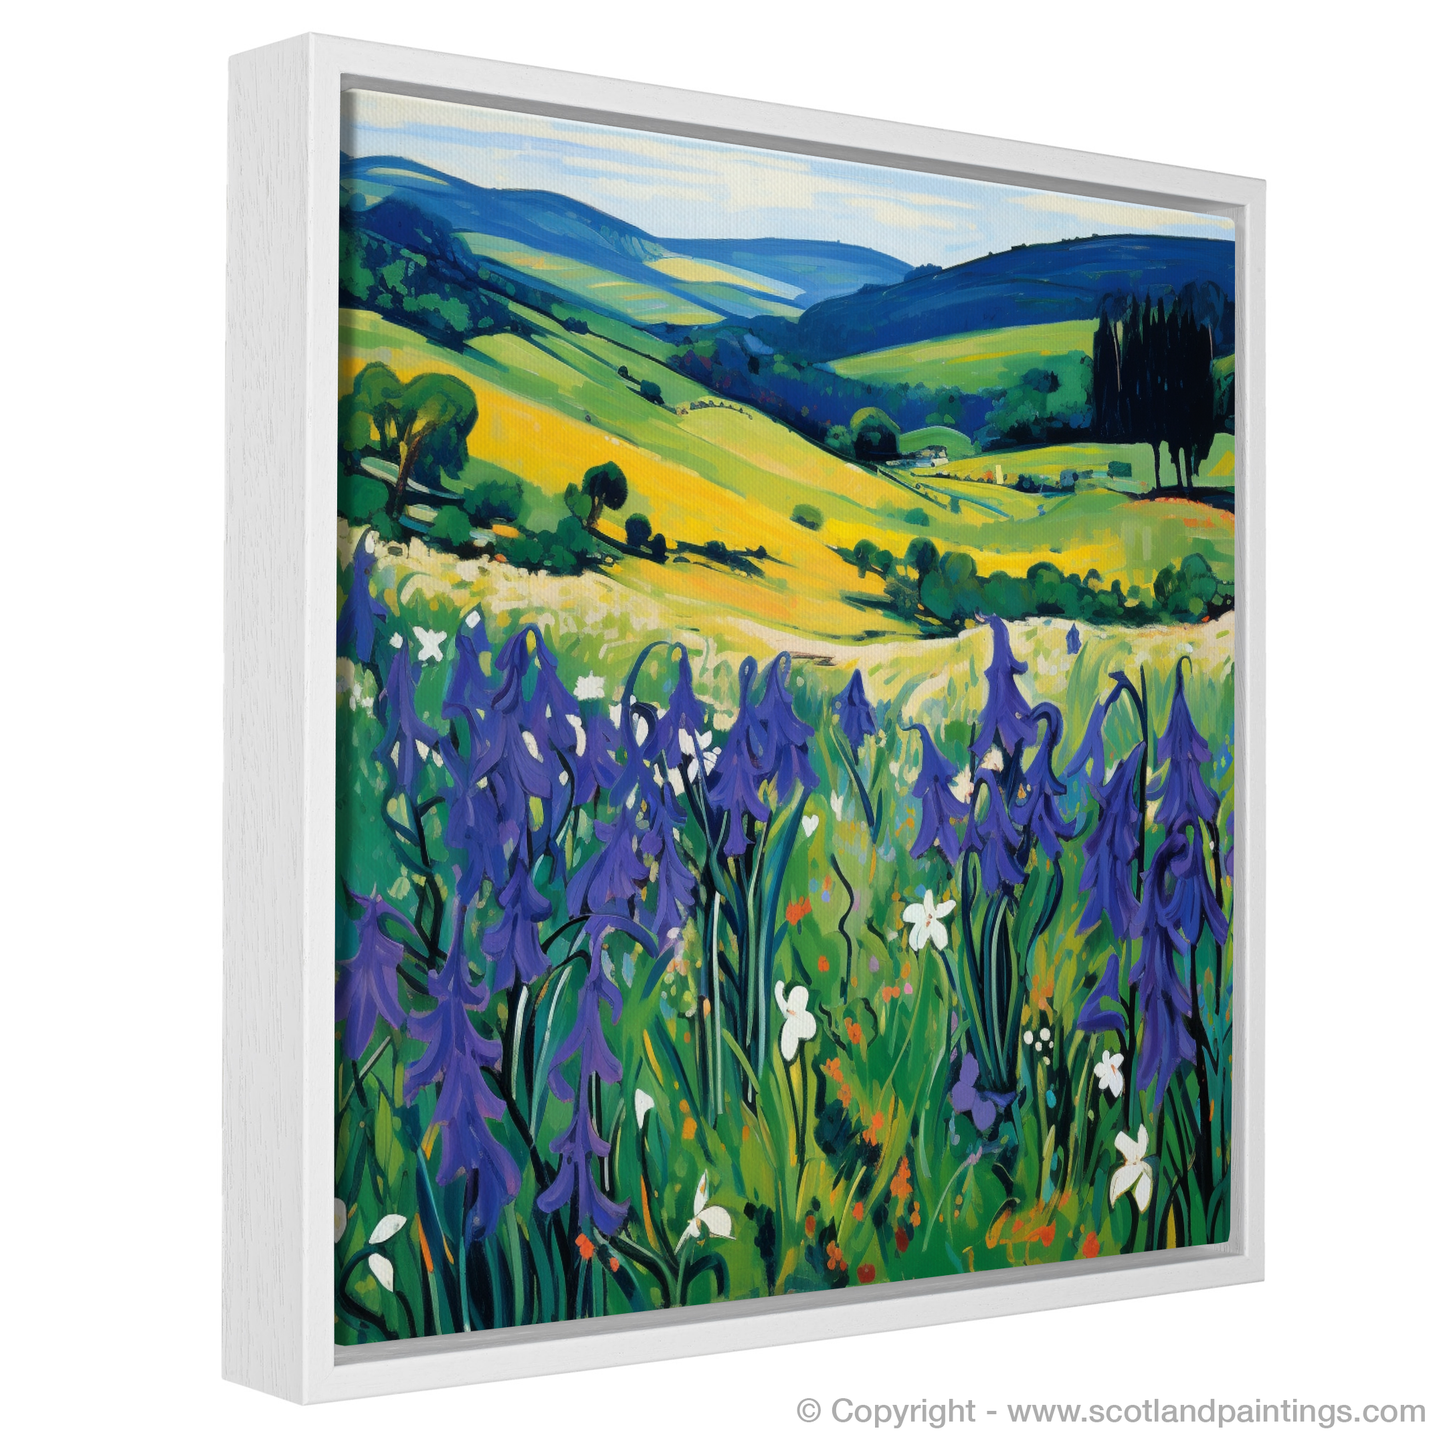 Harebell Harmony: A Fauvist Ode to Scottish Meadows